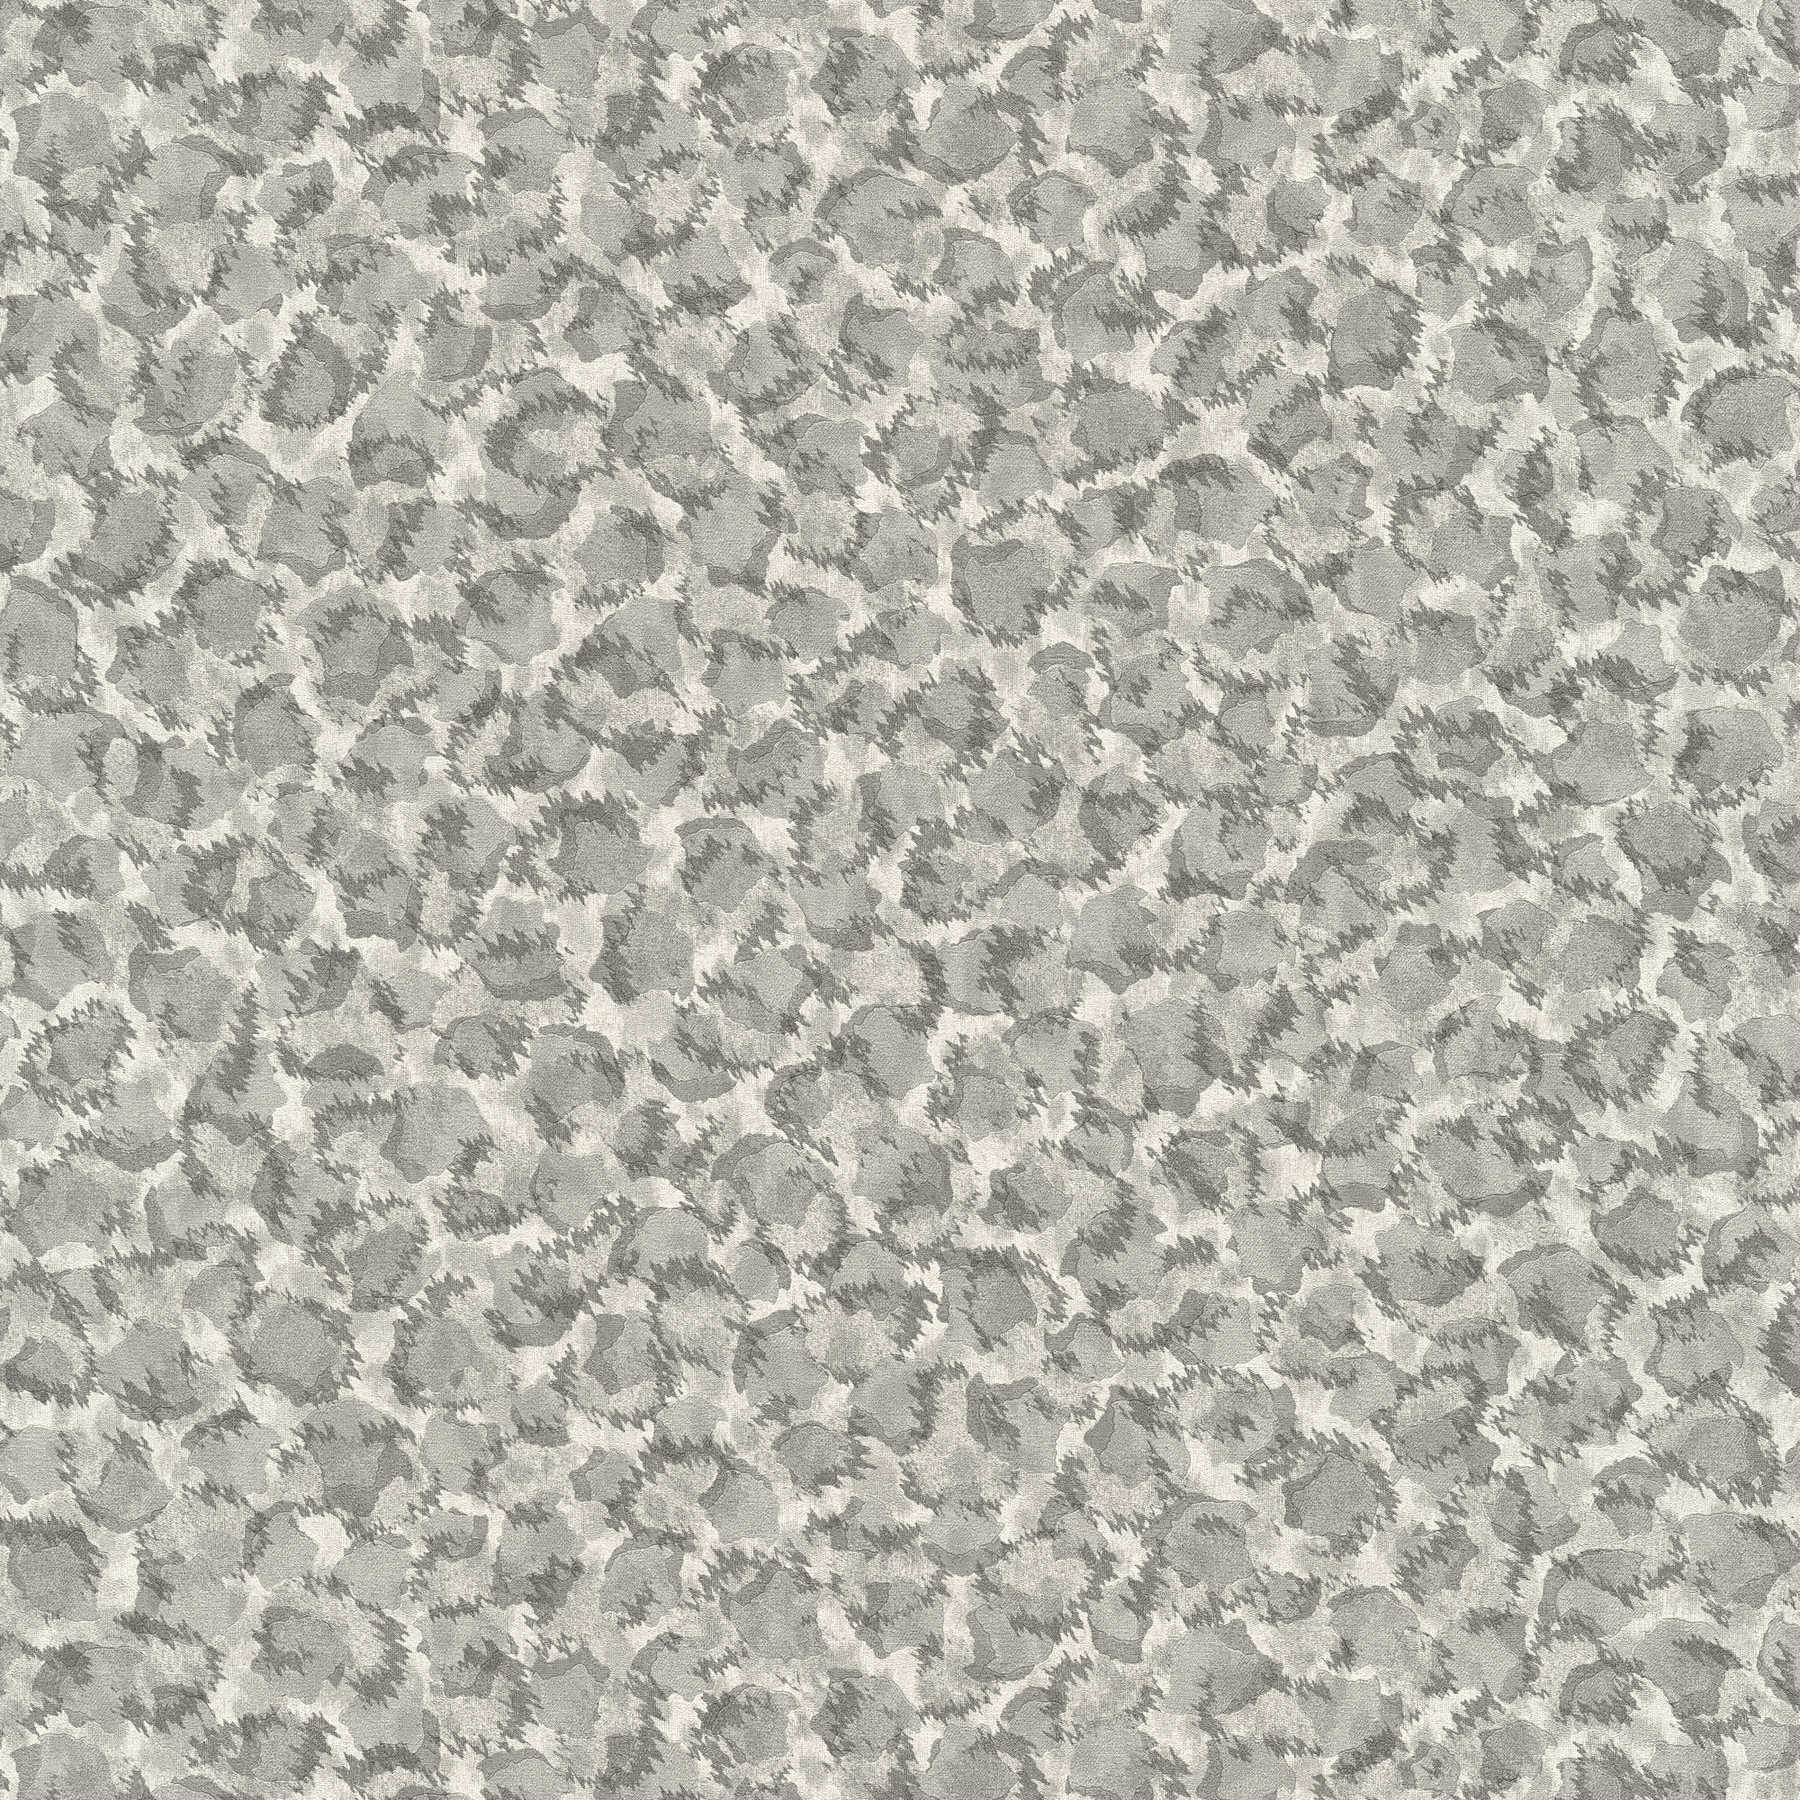 Non-woven wallpaper with polka dots pattern in ethnic style - grey, metallic
